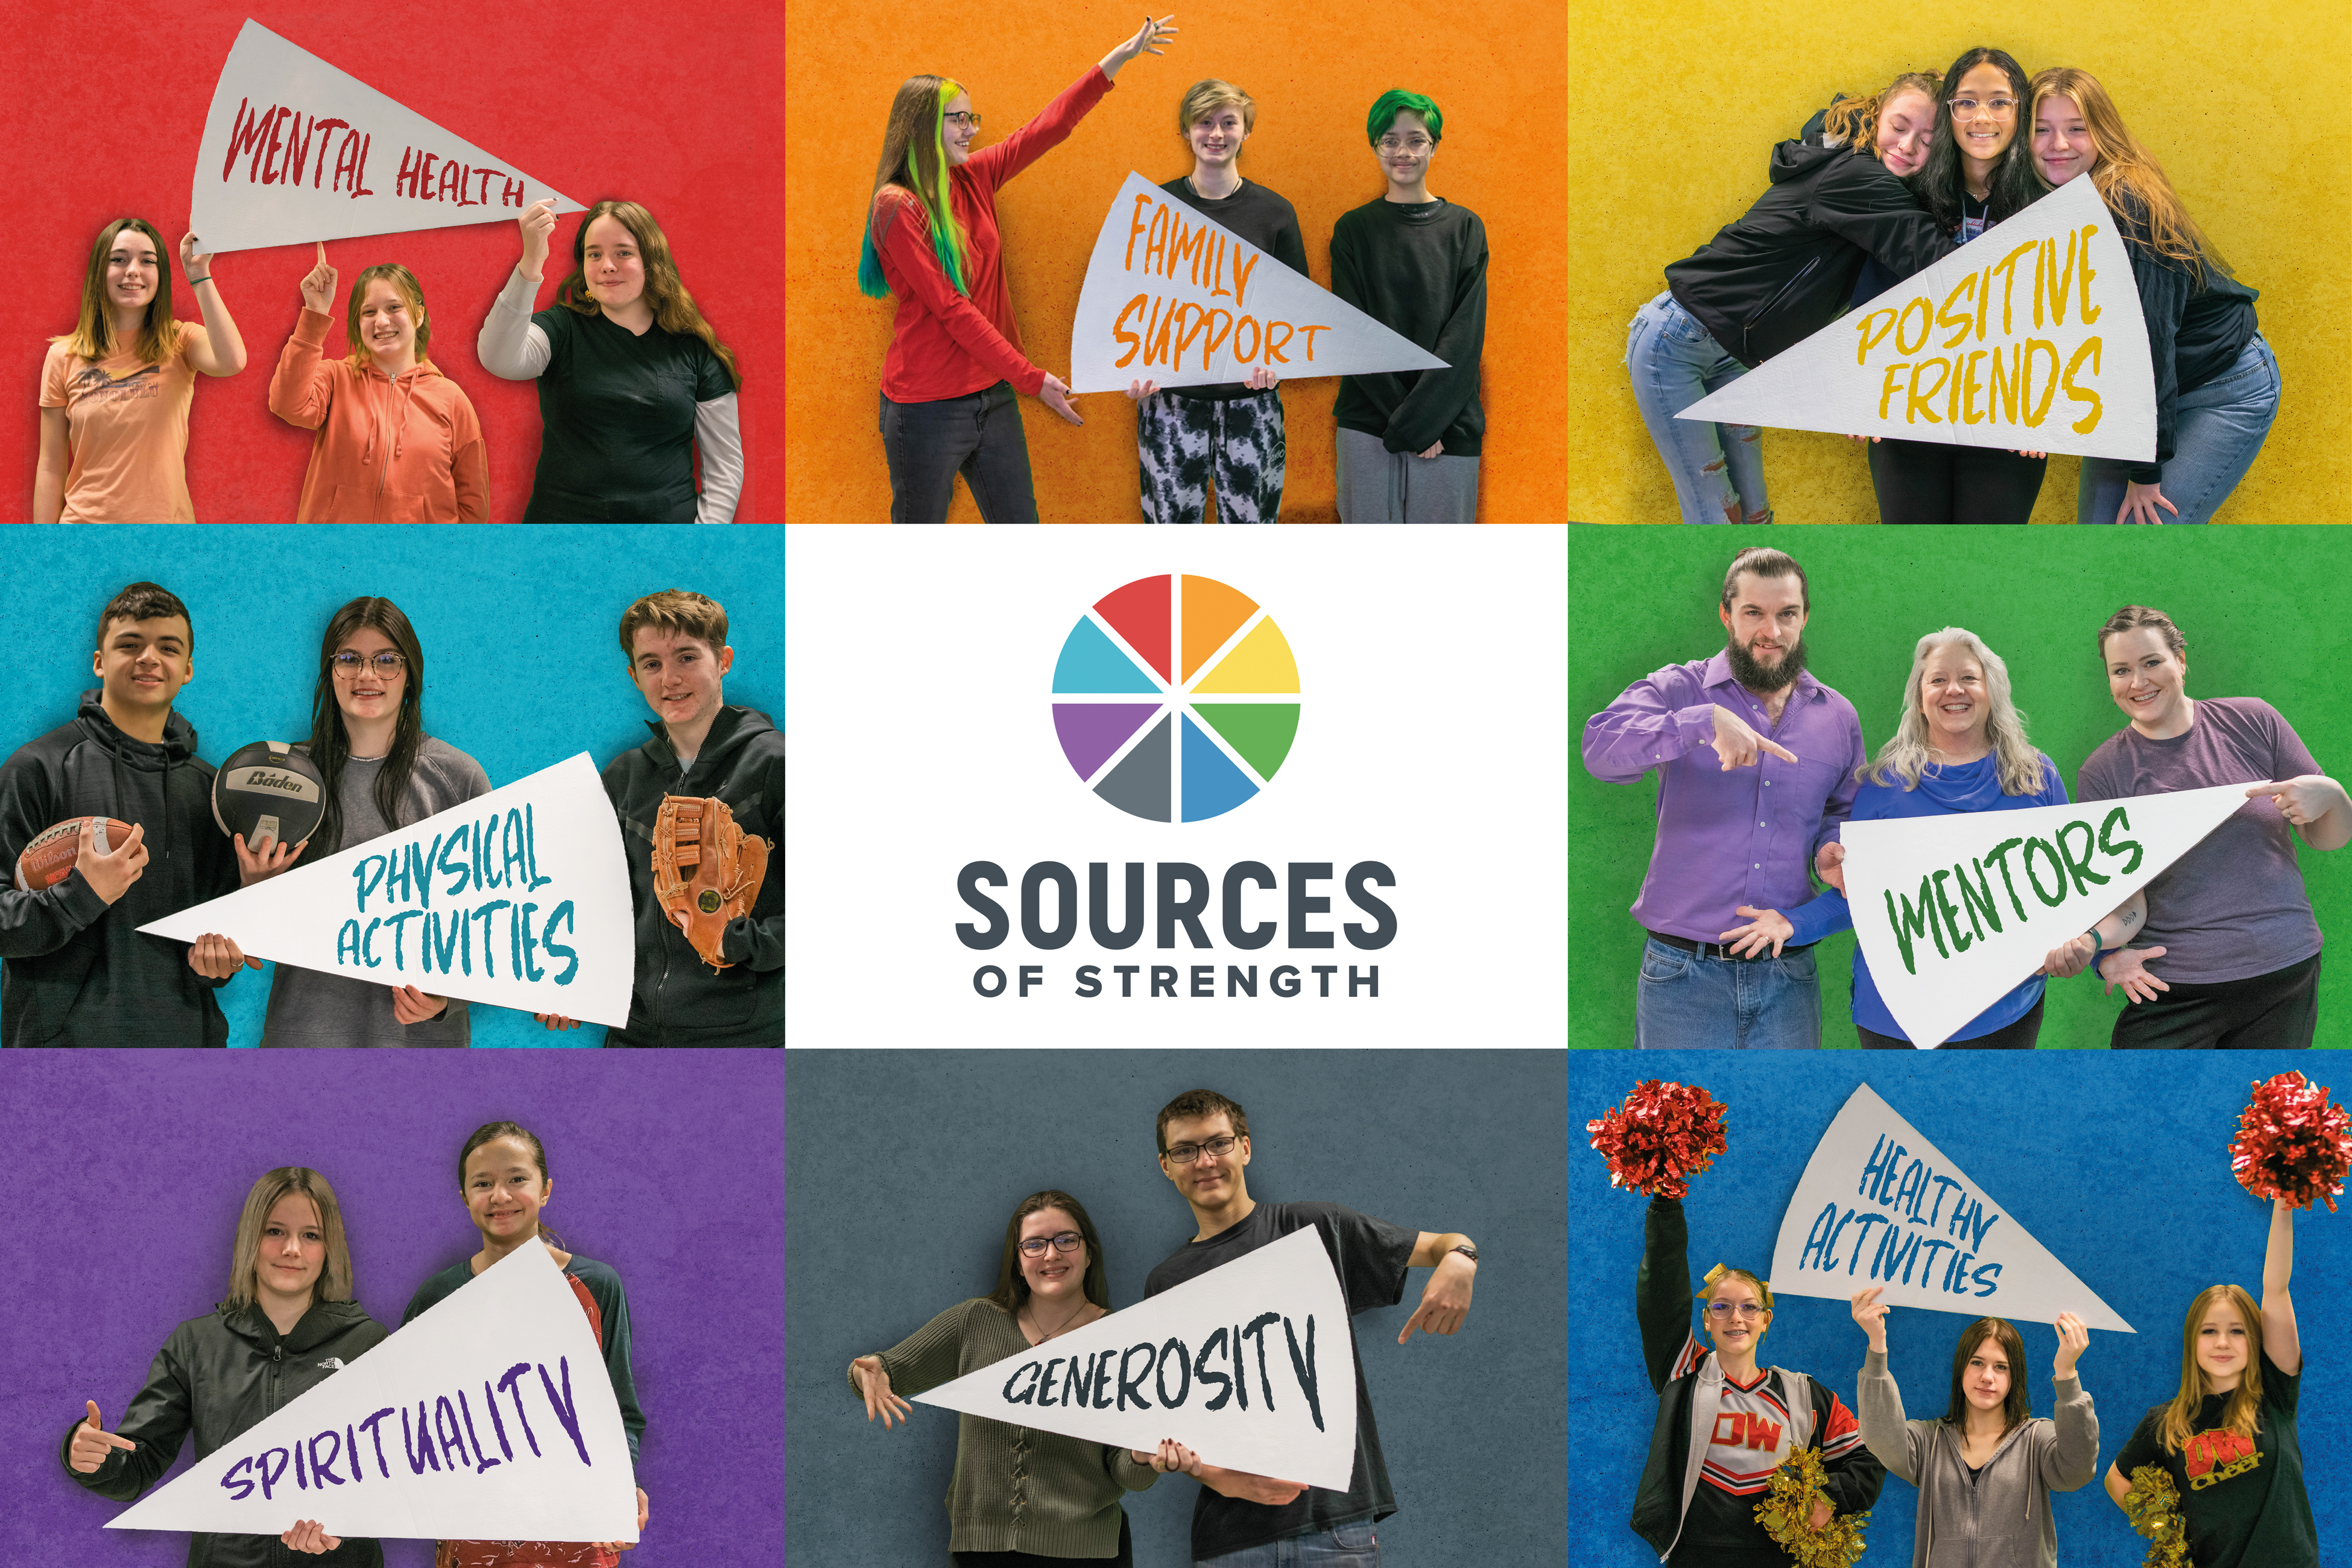 Sources of Strength. Students and staff holding signs reading mental health, family support, positive friends, physical activities, mentors, spirituality, generosity, healthy activities